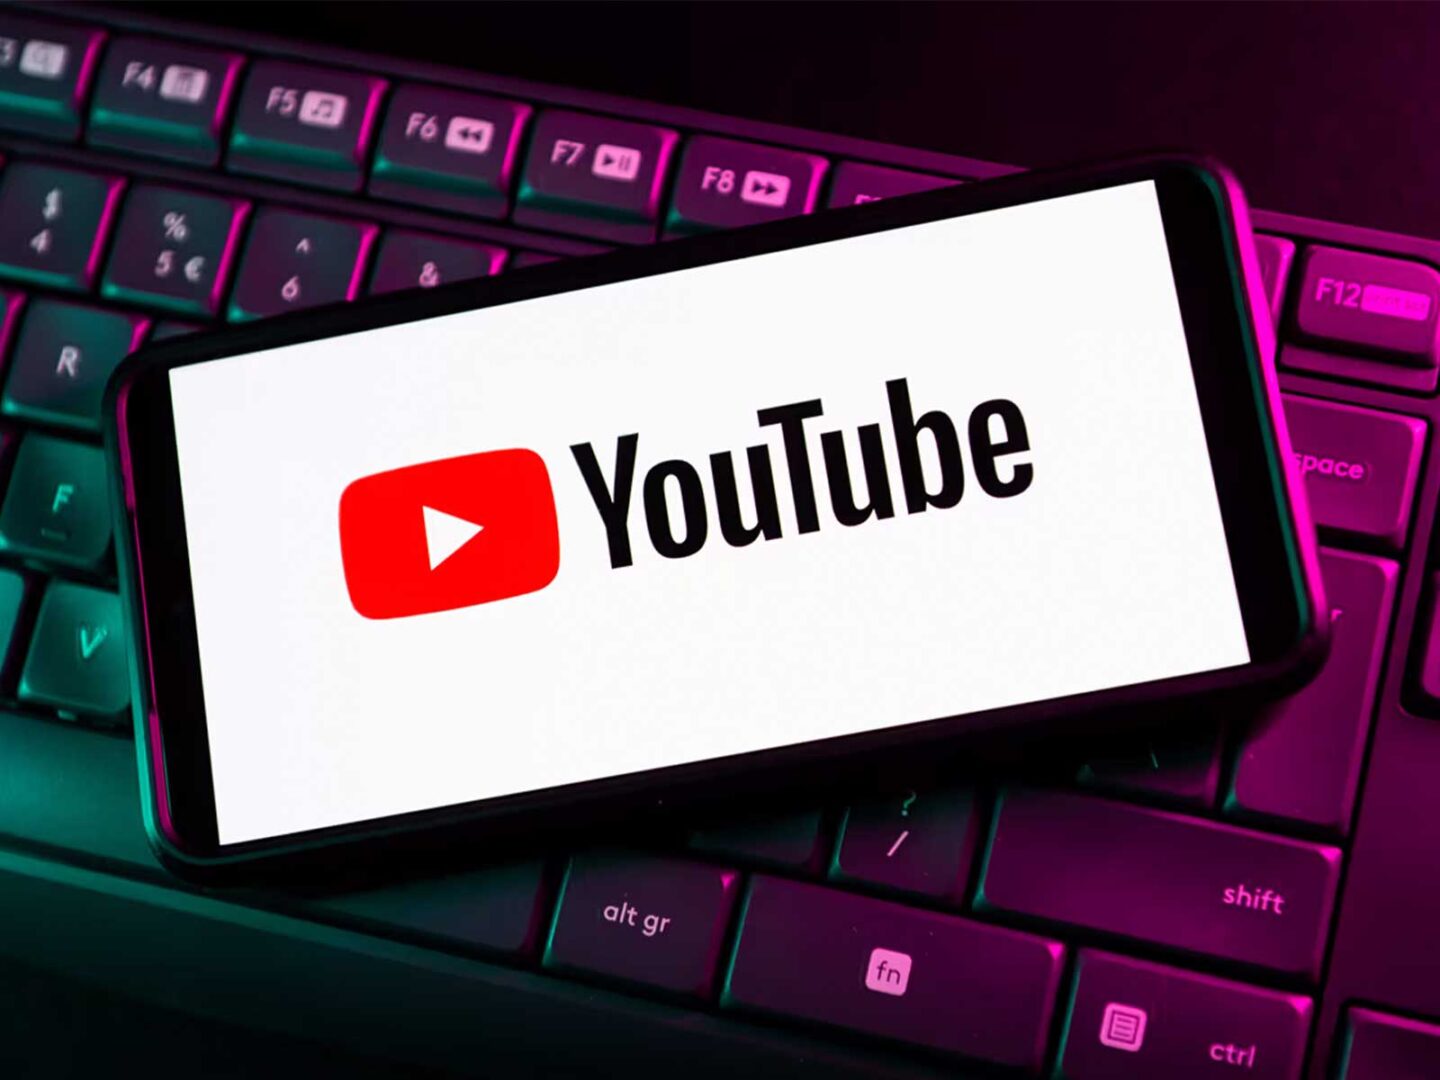 YouTube to integrate an artificial intelligence chatbot